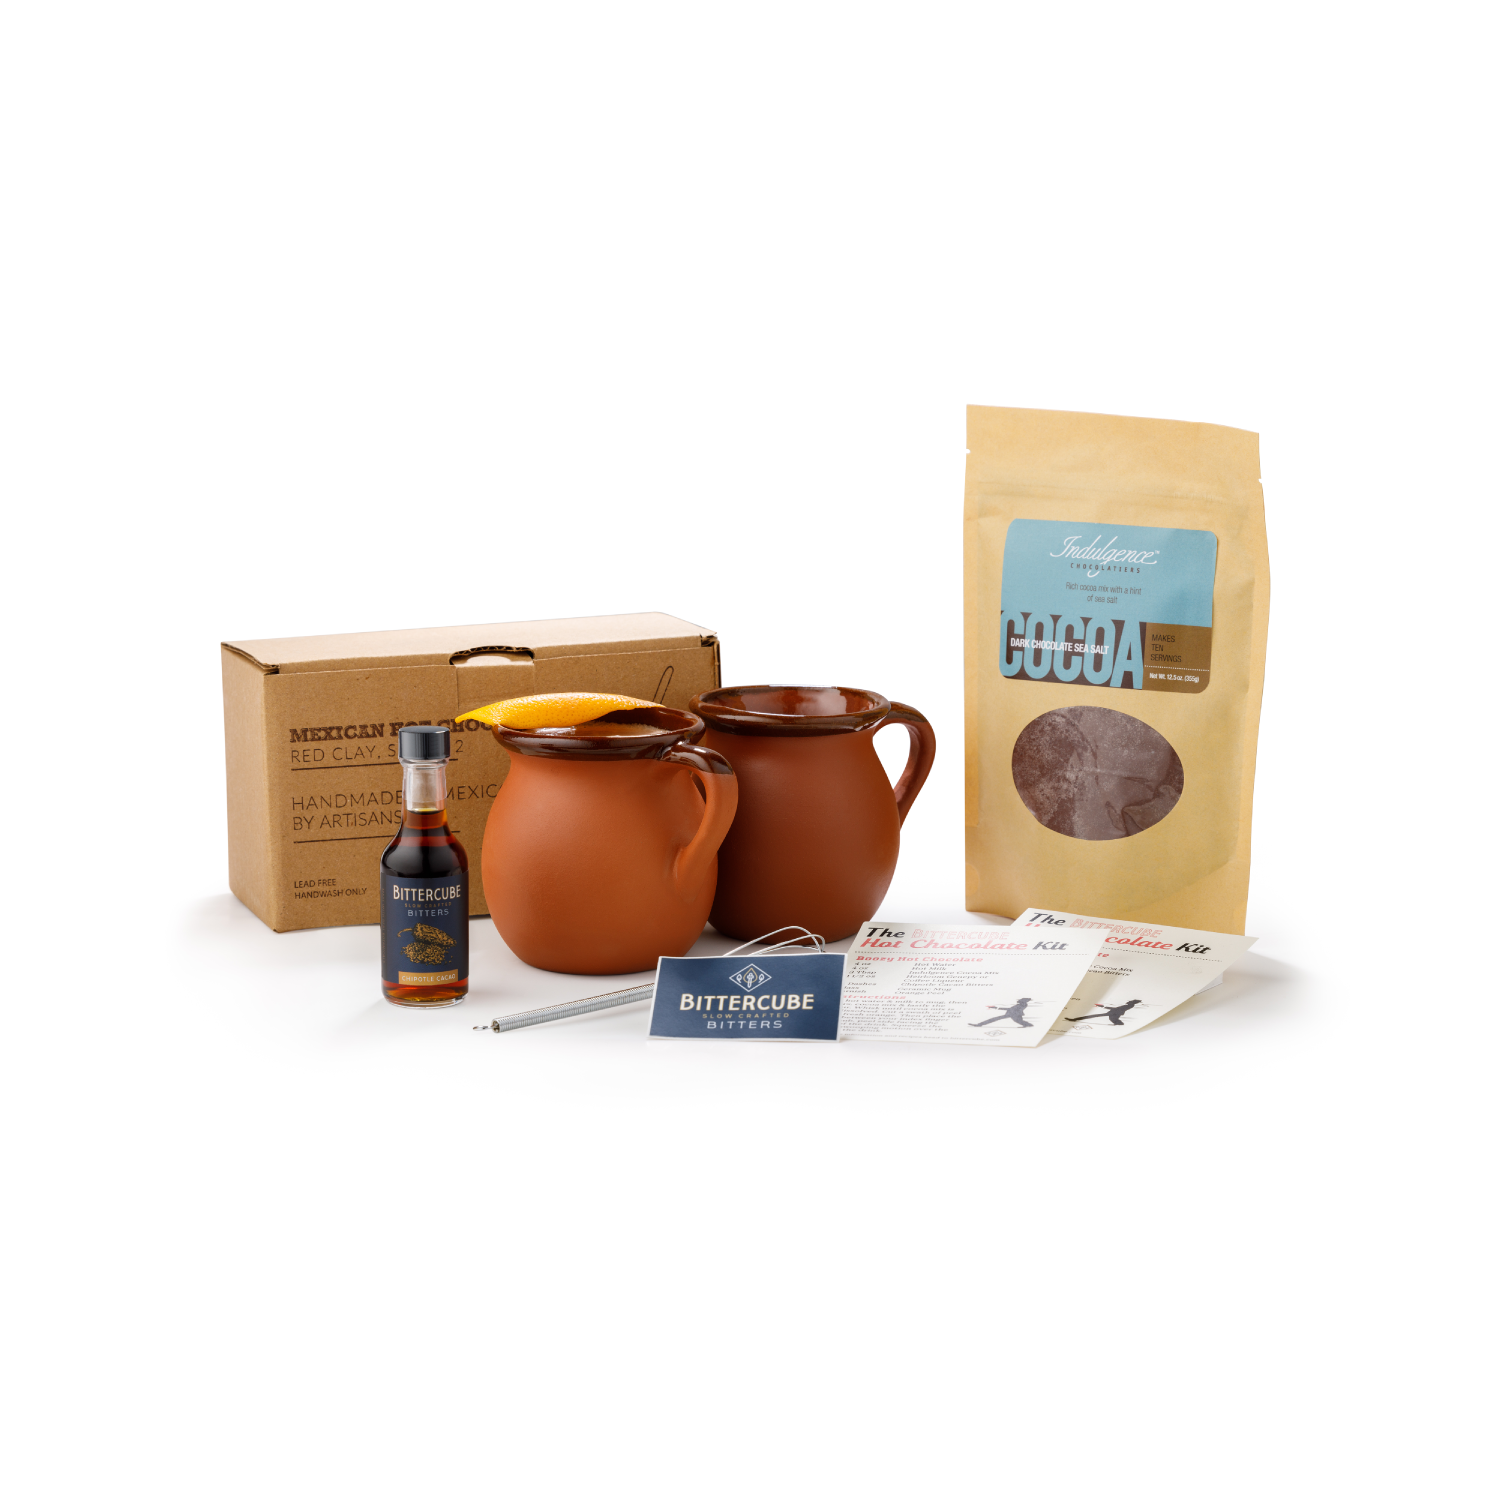 Curated cocktail kits